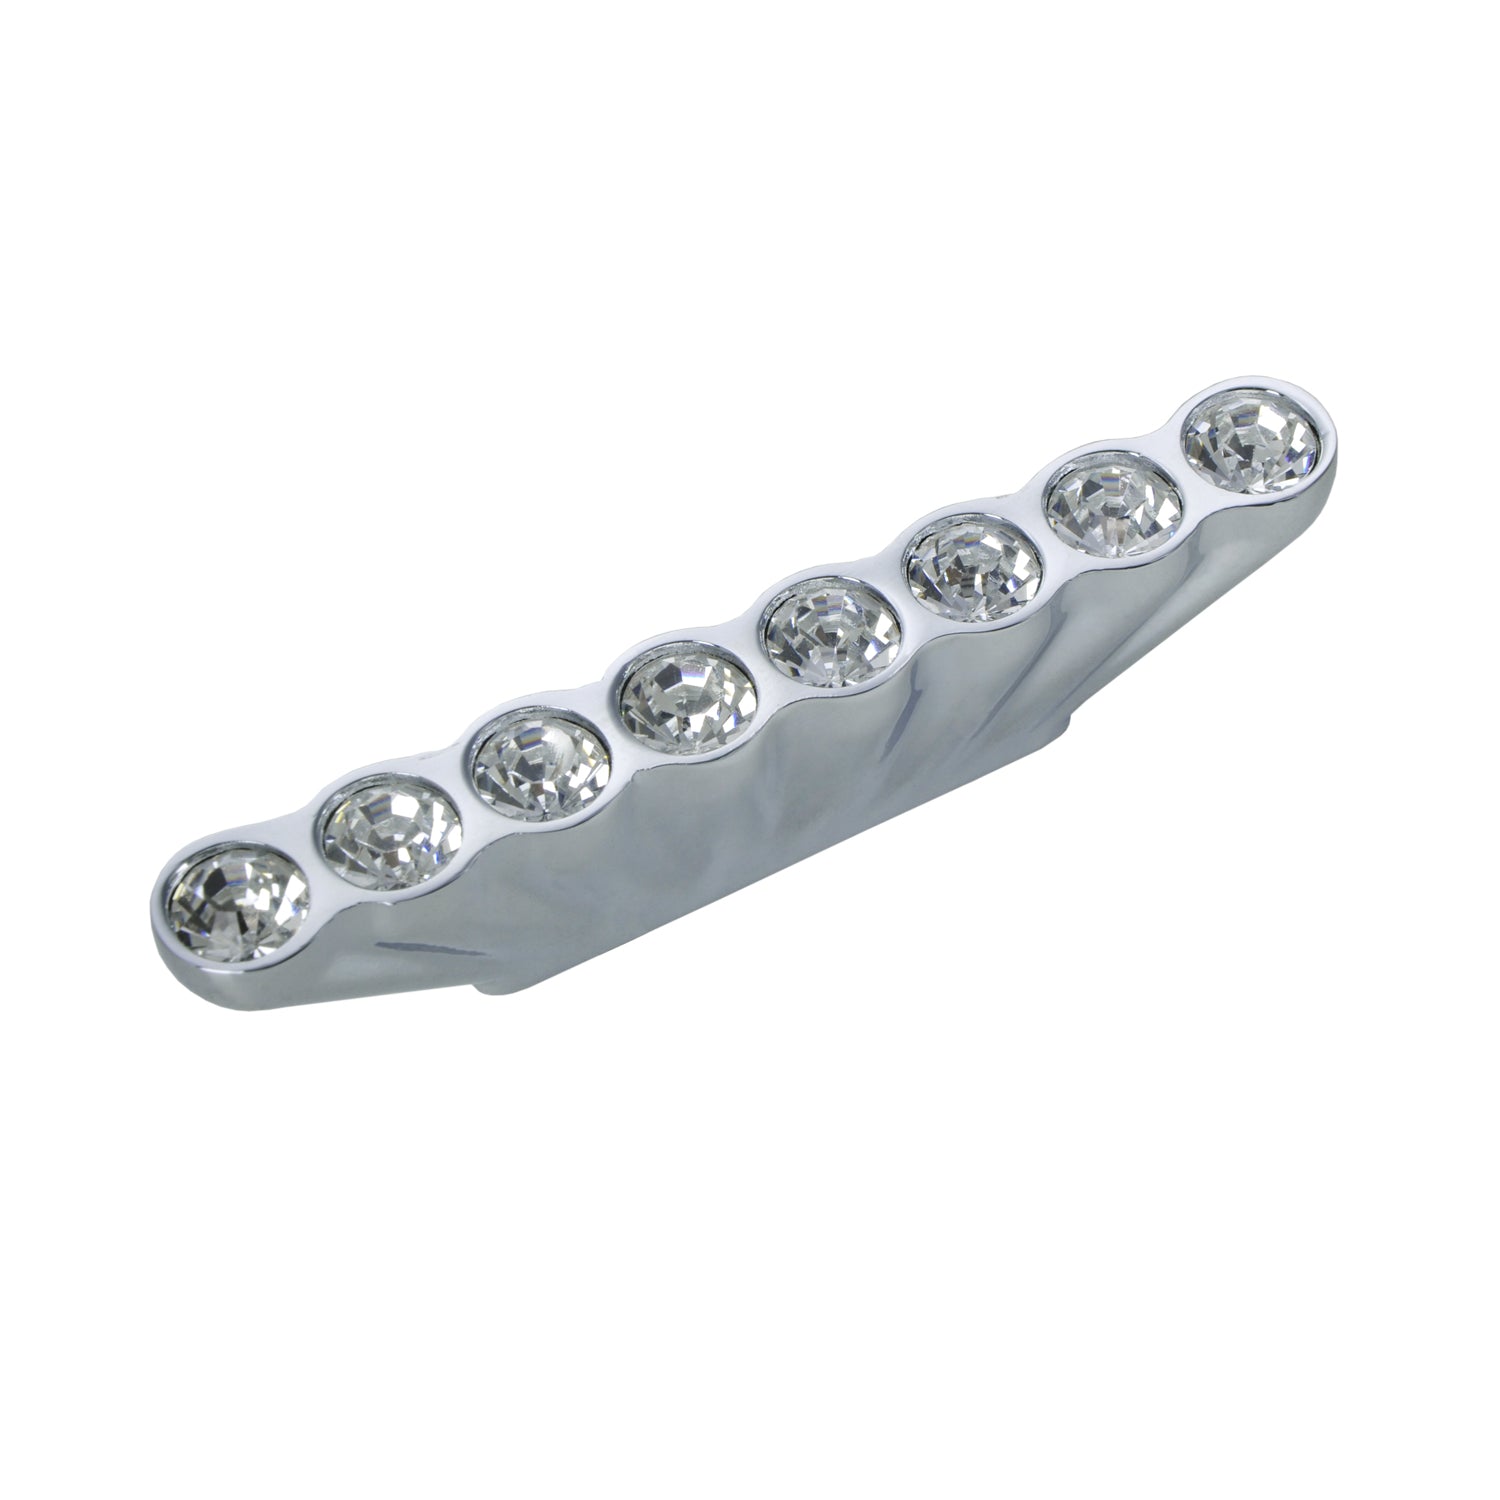 Utopia Alley HW283PLCH021 Gleam 8 Crystal Cabinet Pull, 1.3", Polished Chrome